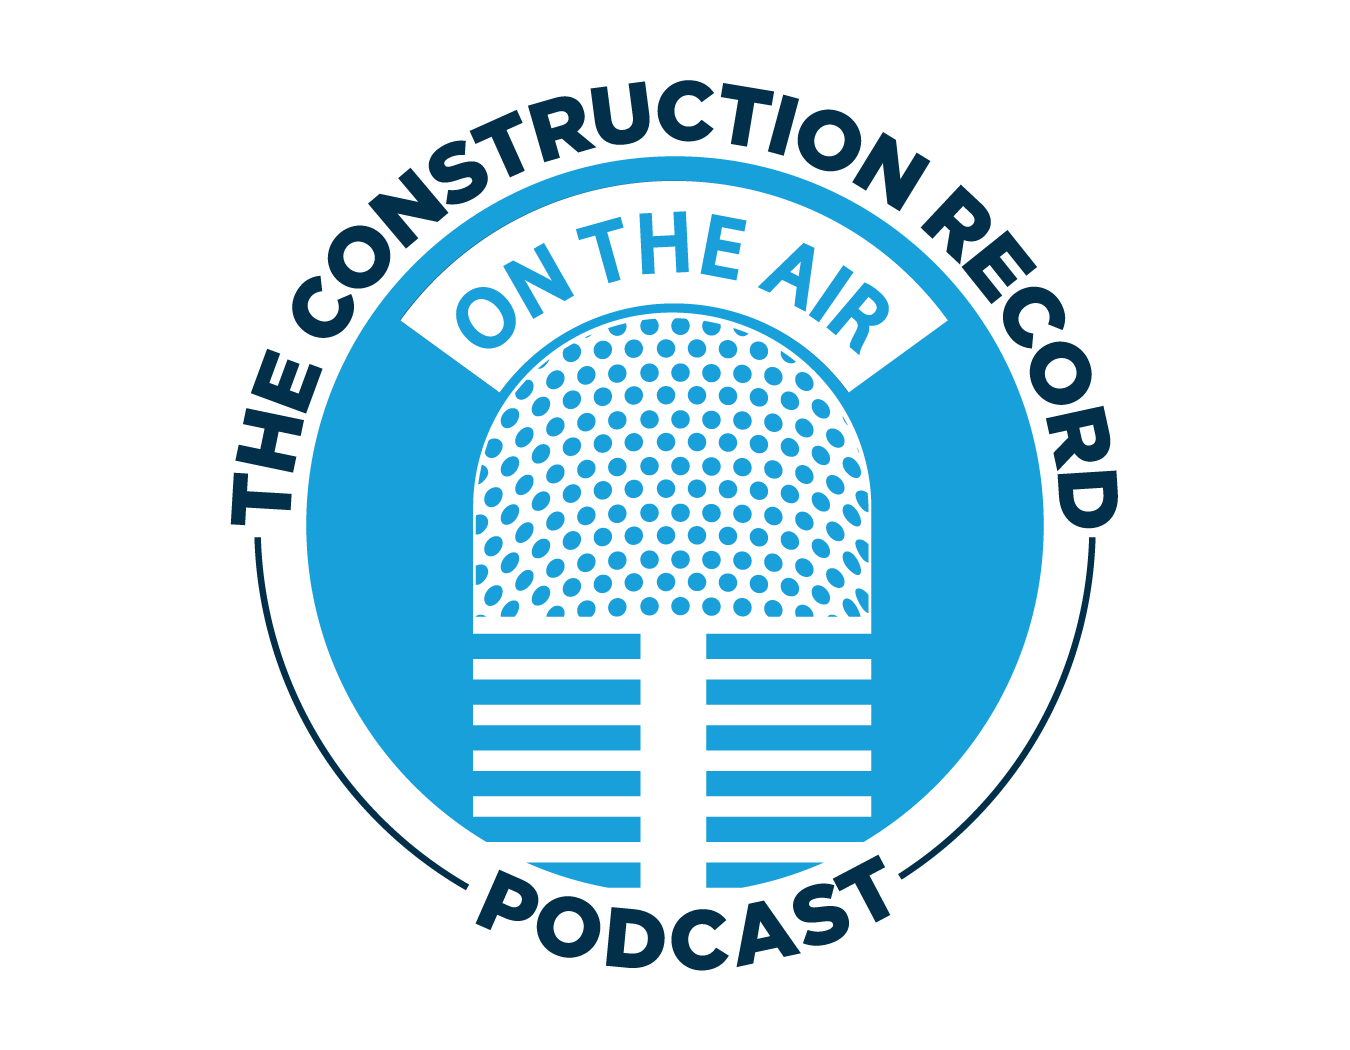 The Construction Record